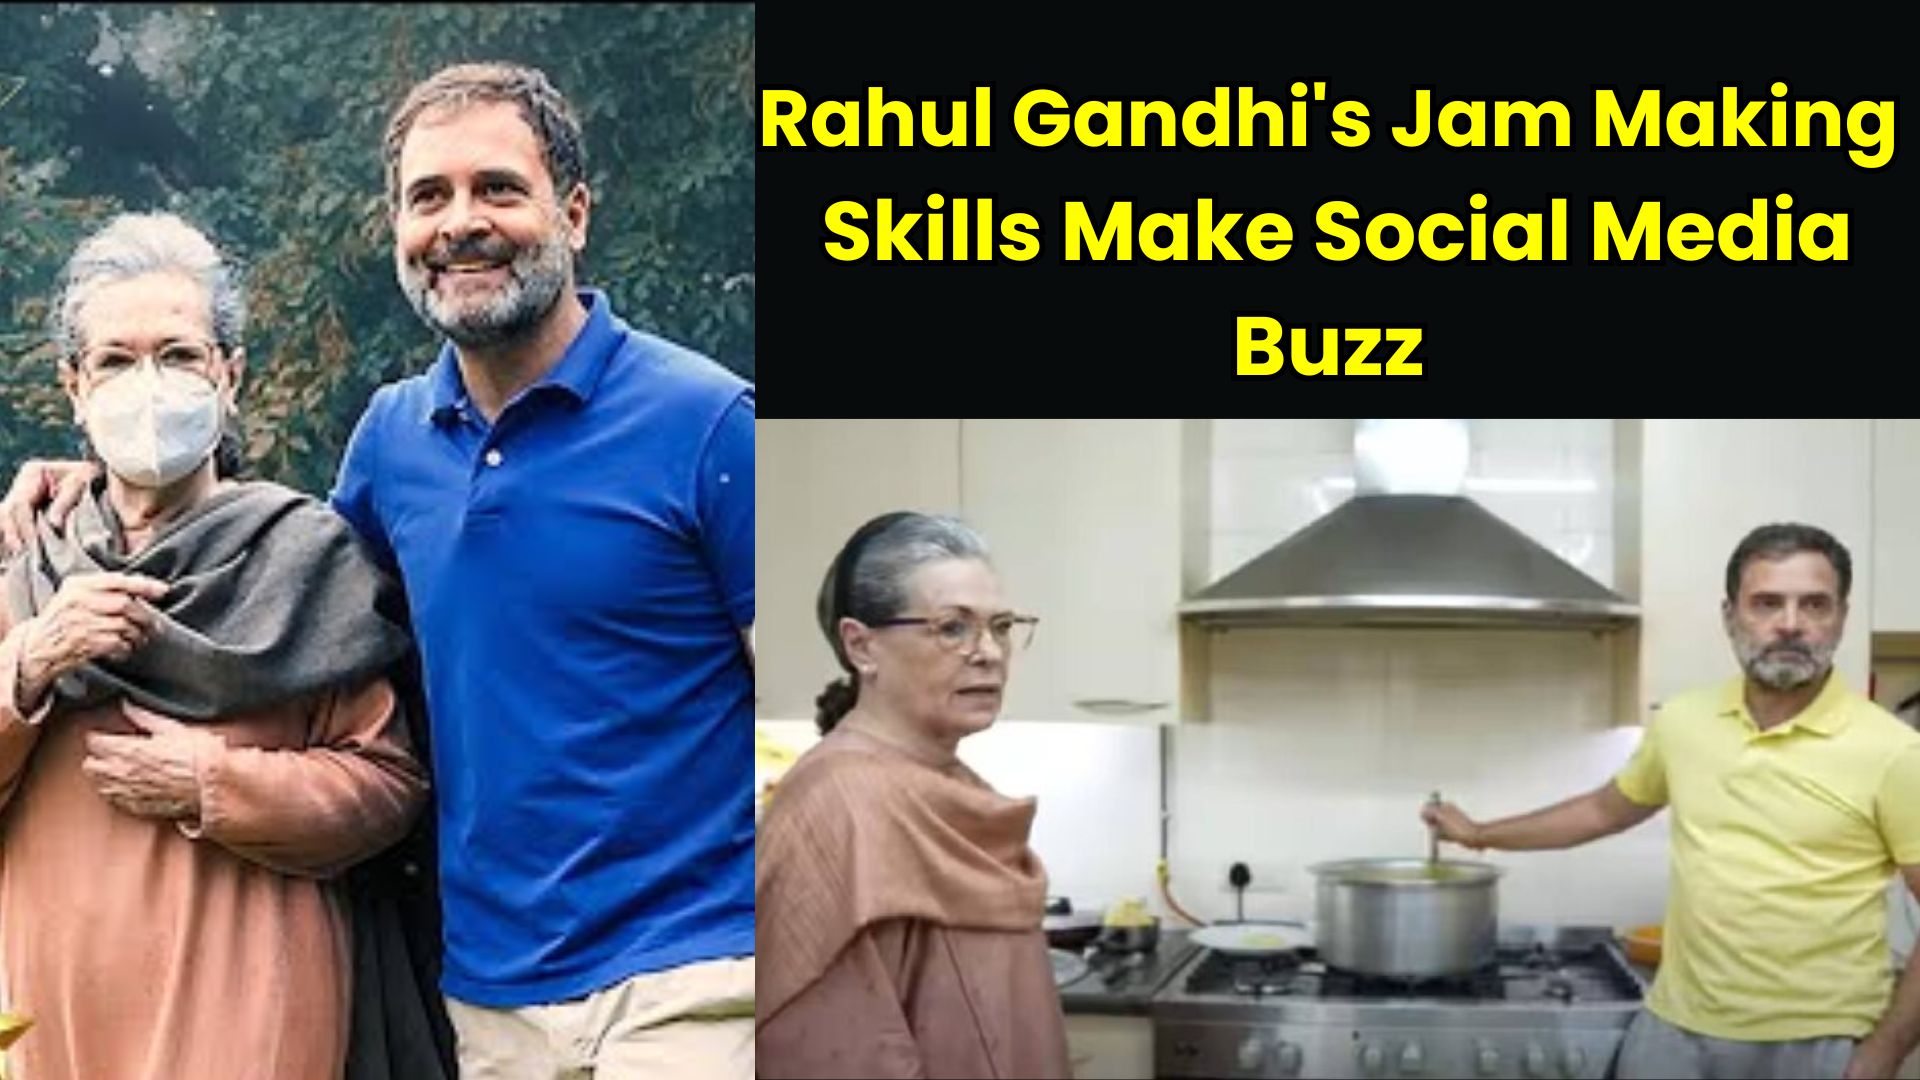 From Kitchen to Politics: Rahul Gandhi Crafts Jam with Mother Sonia Gandhi’s Recipe, Extends Unique Offer to BJP